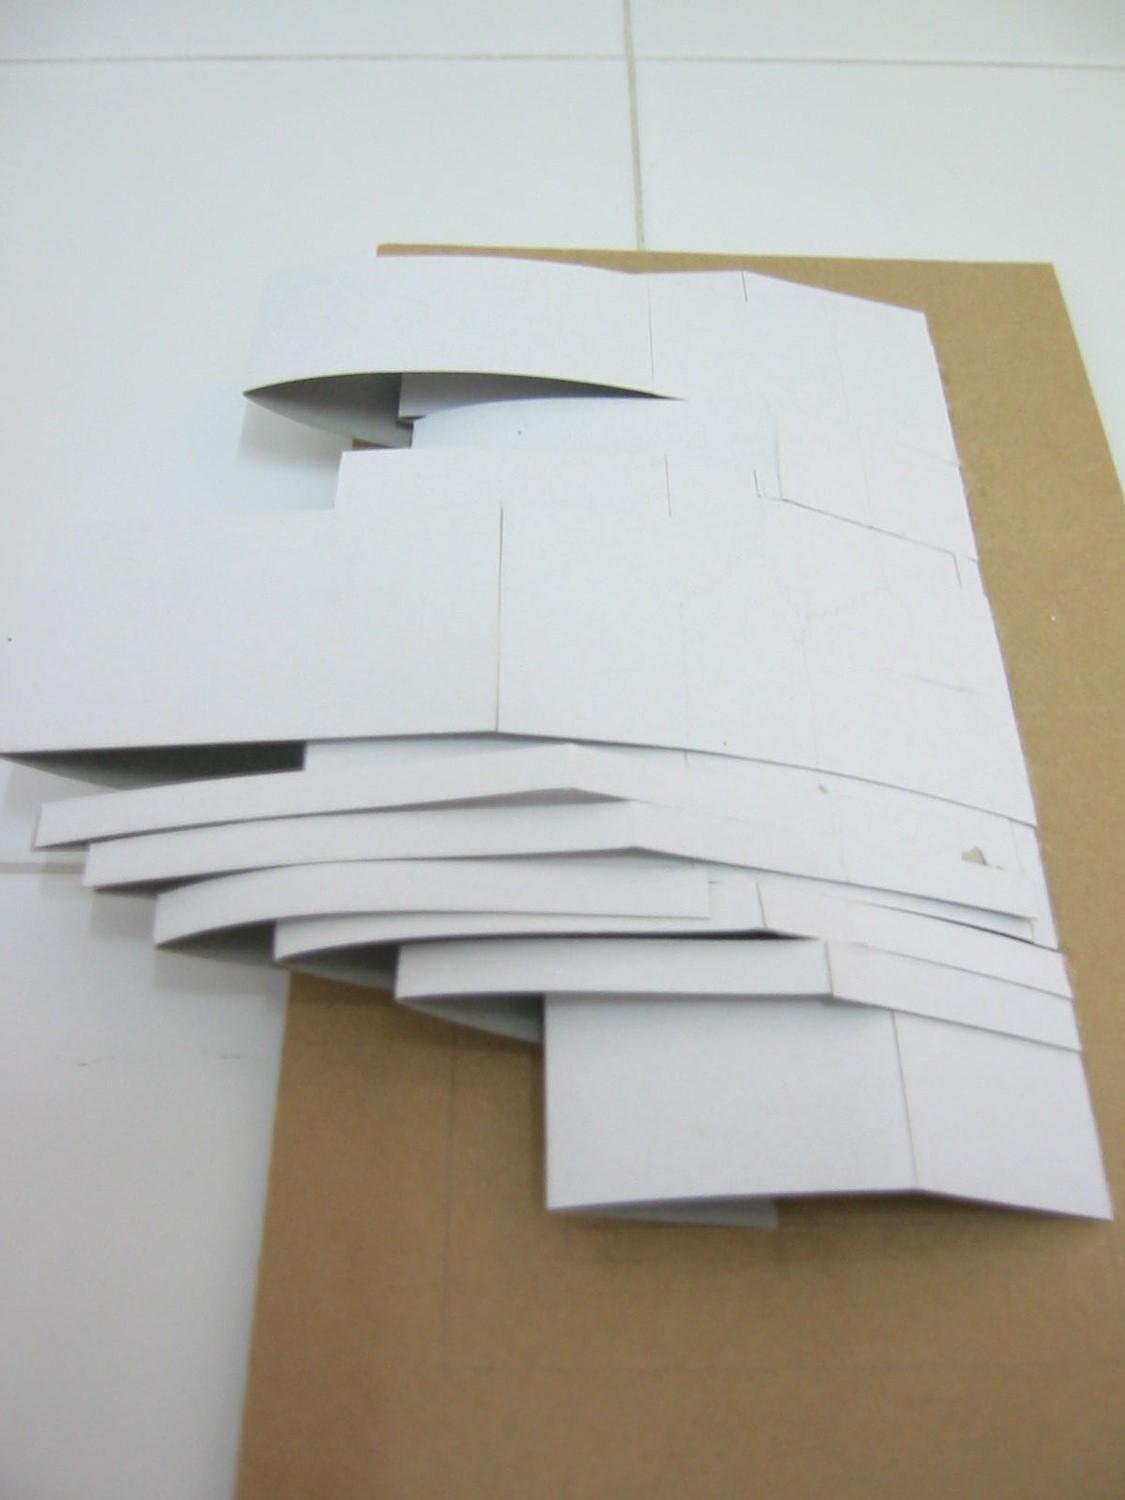 From sketches, to paper folding, to explore the possible spatial dynamics by dissecting a box.